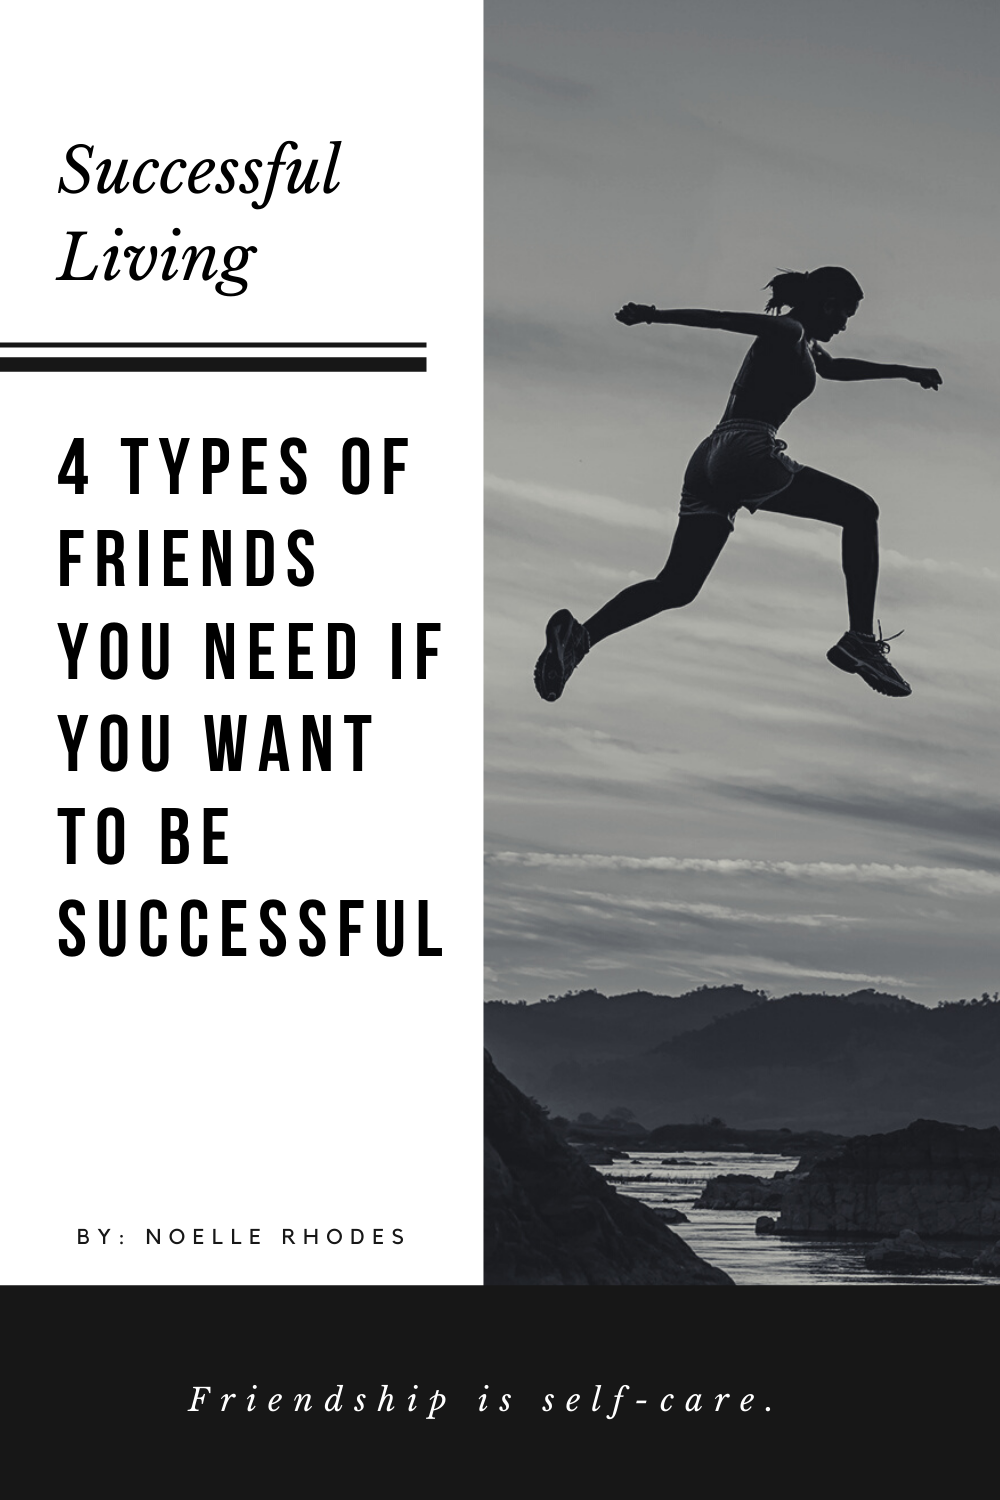 4 Types Of Friendships You'll Have Throughout Your Life